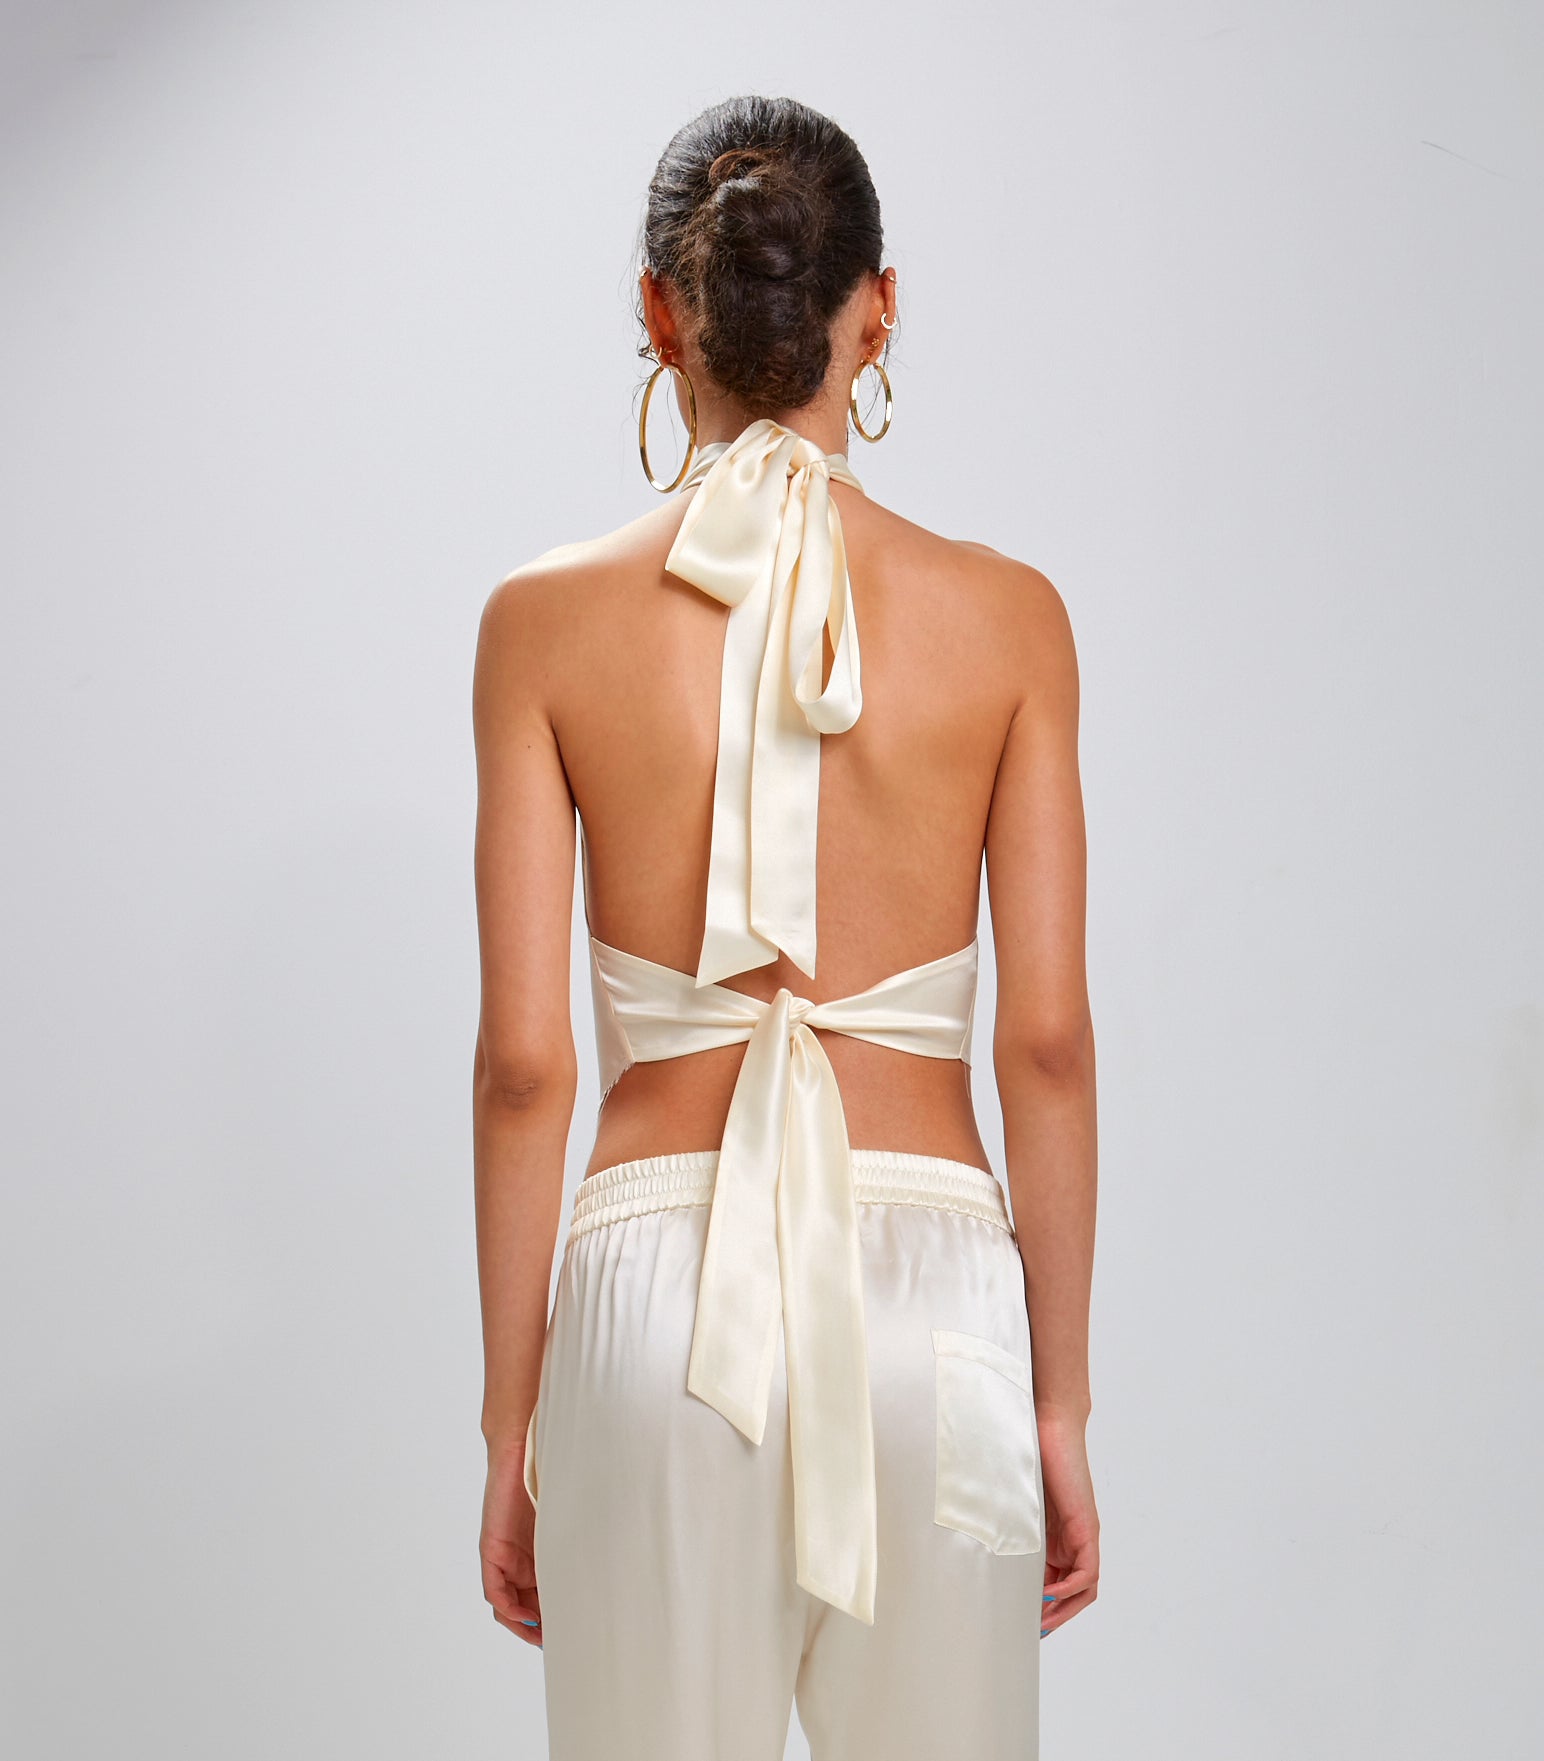 Back view: The Devi Ivory halter tie back 100% Silk Charmeuse top with pointed raw edge